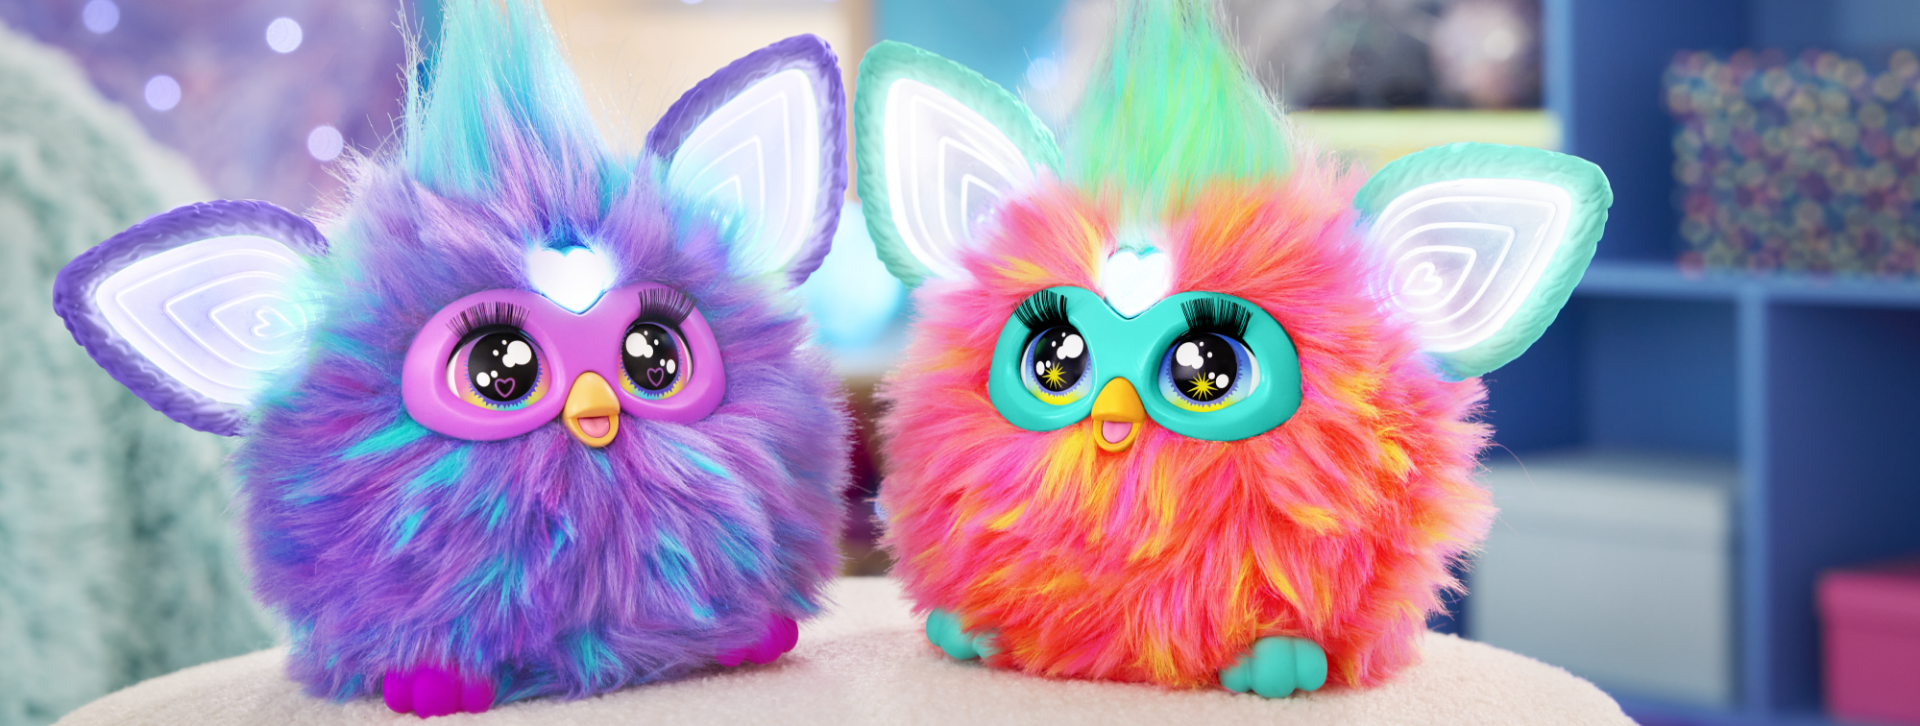 Why won't Argos let me return my Furby after security alert